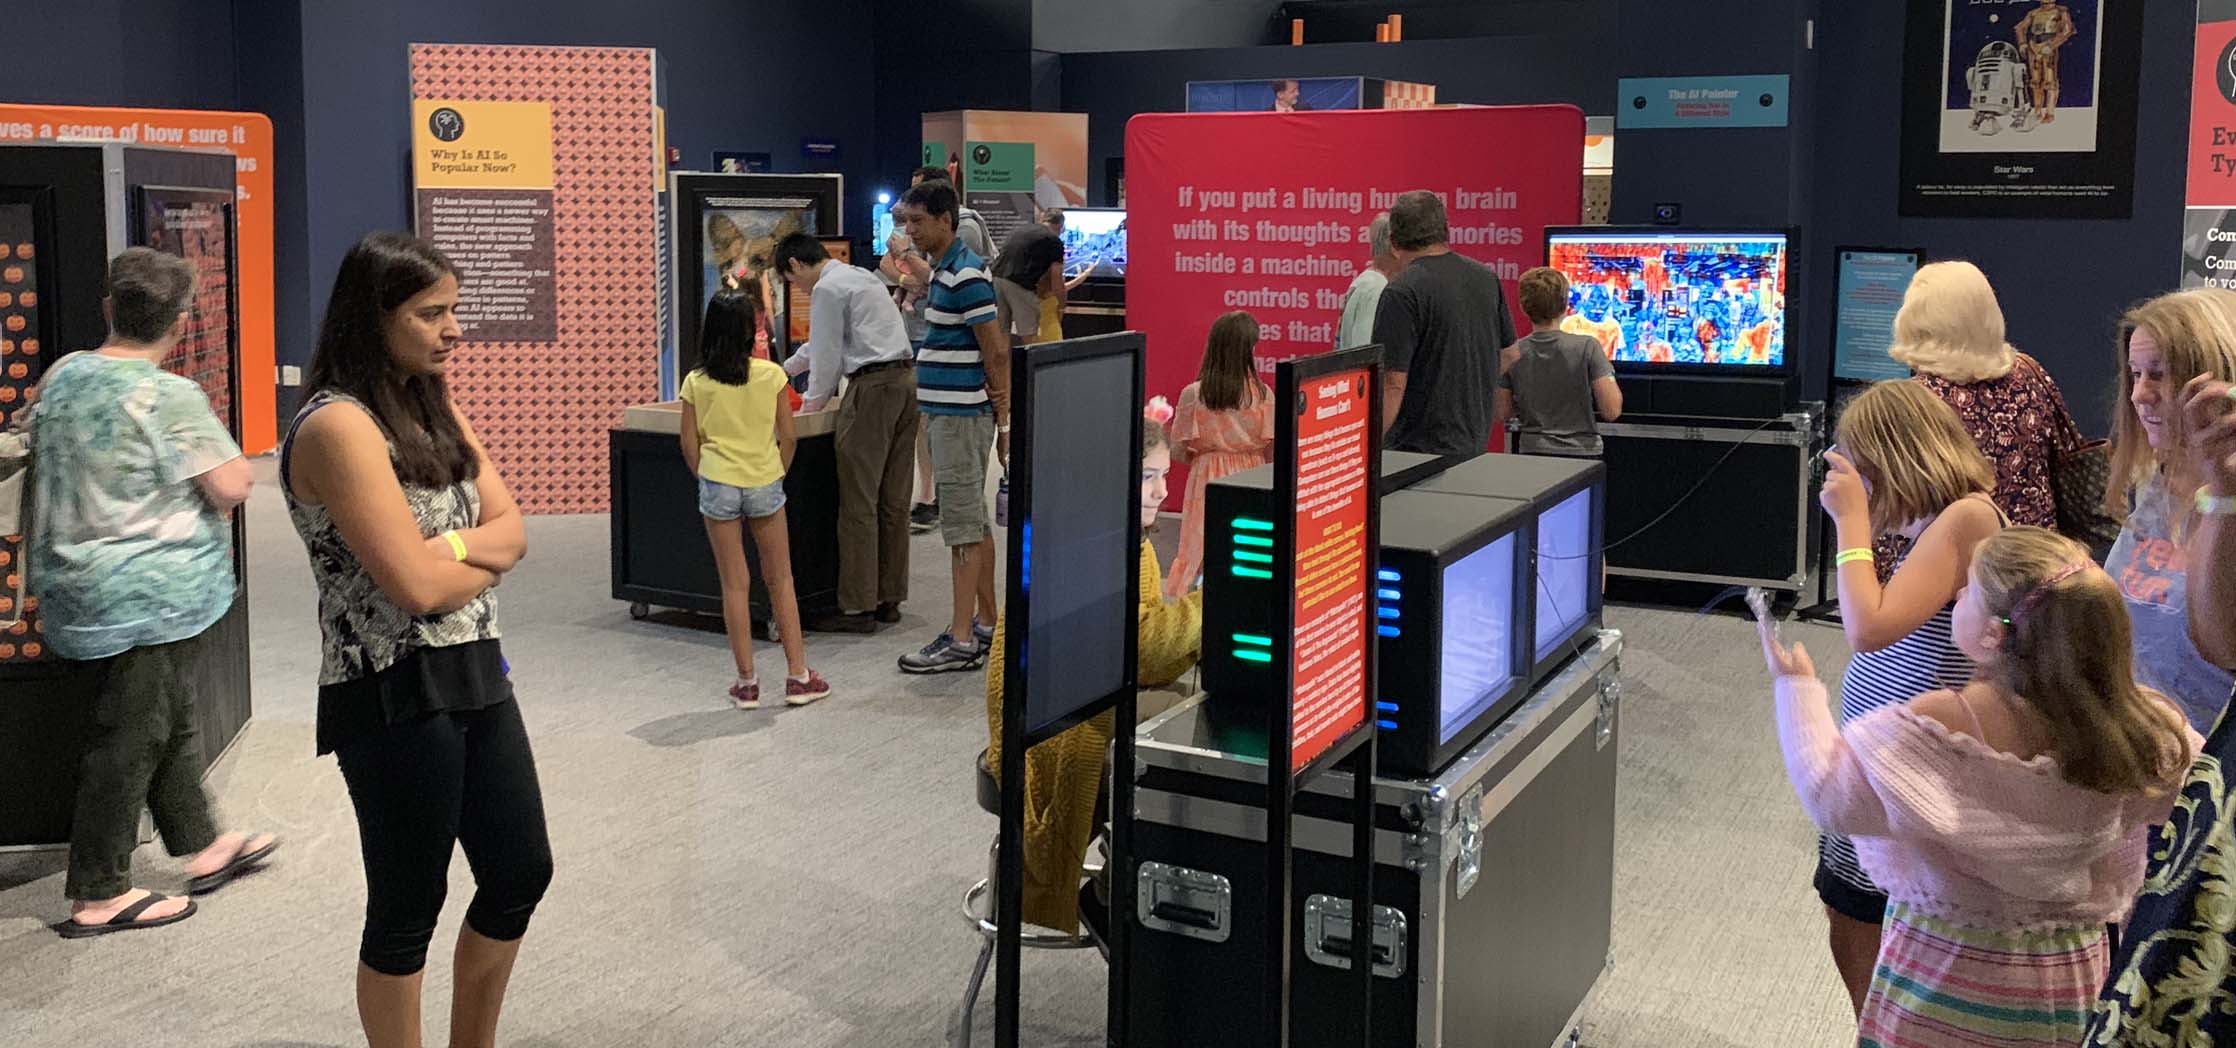 People looking at an exhibit in a museum.